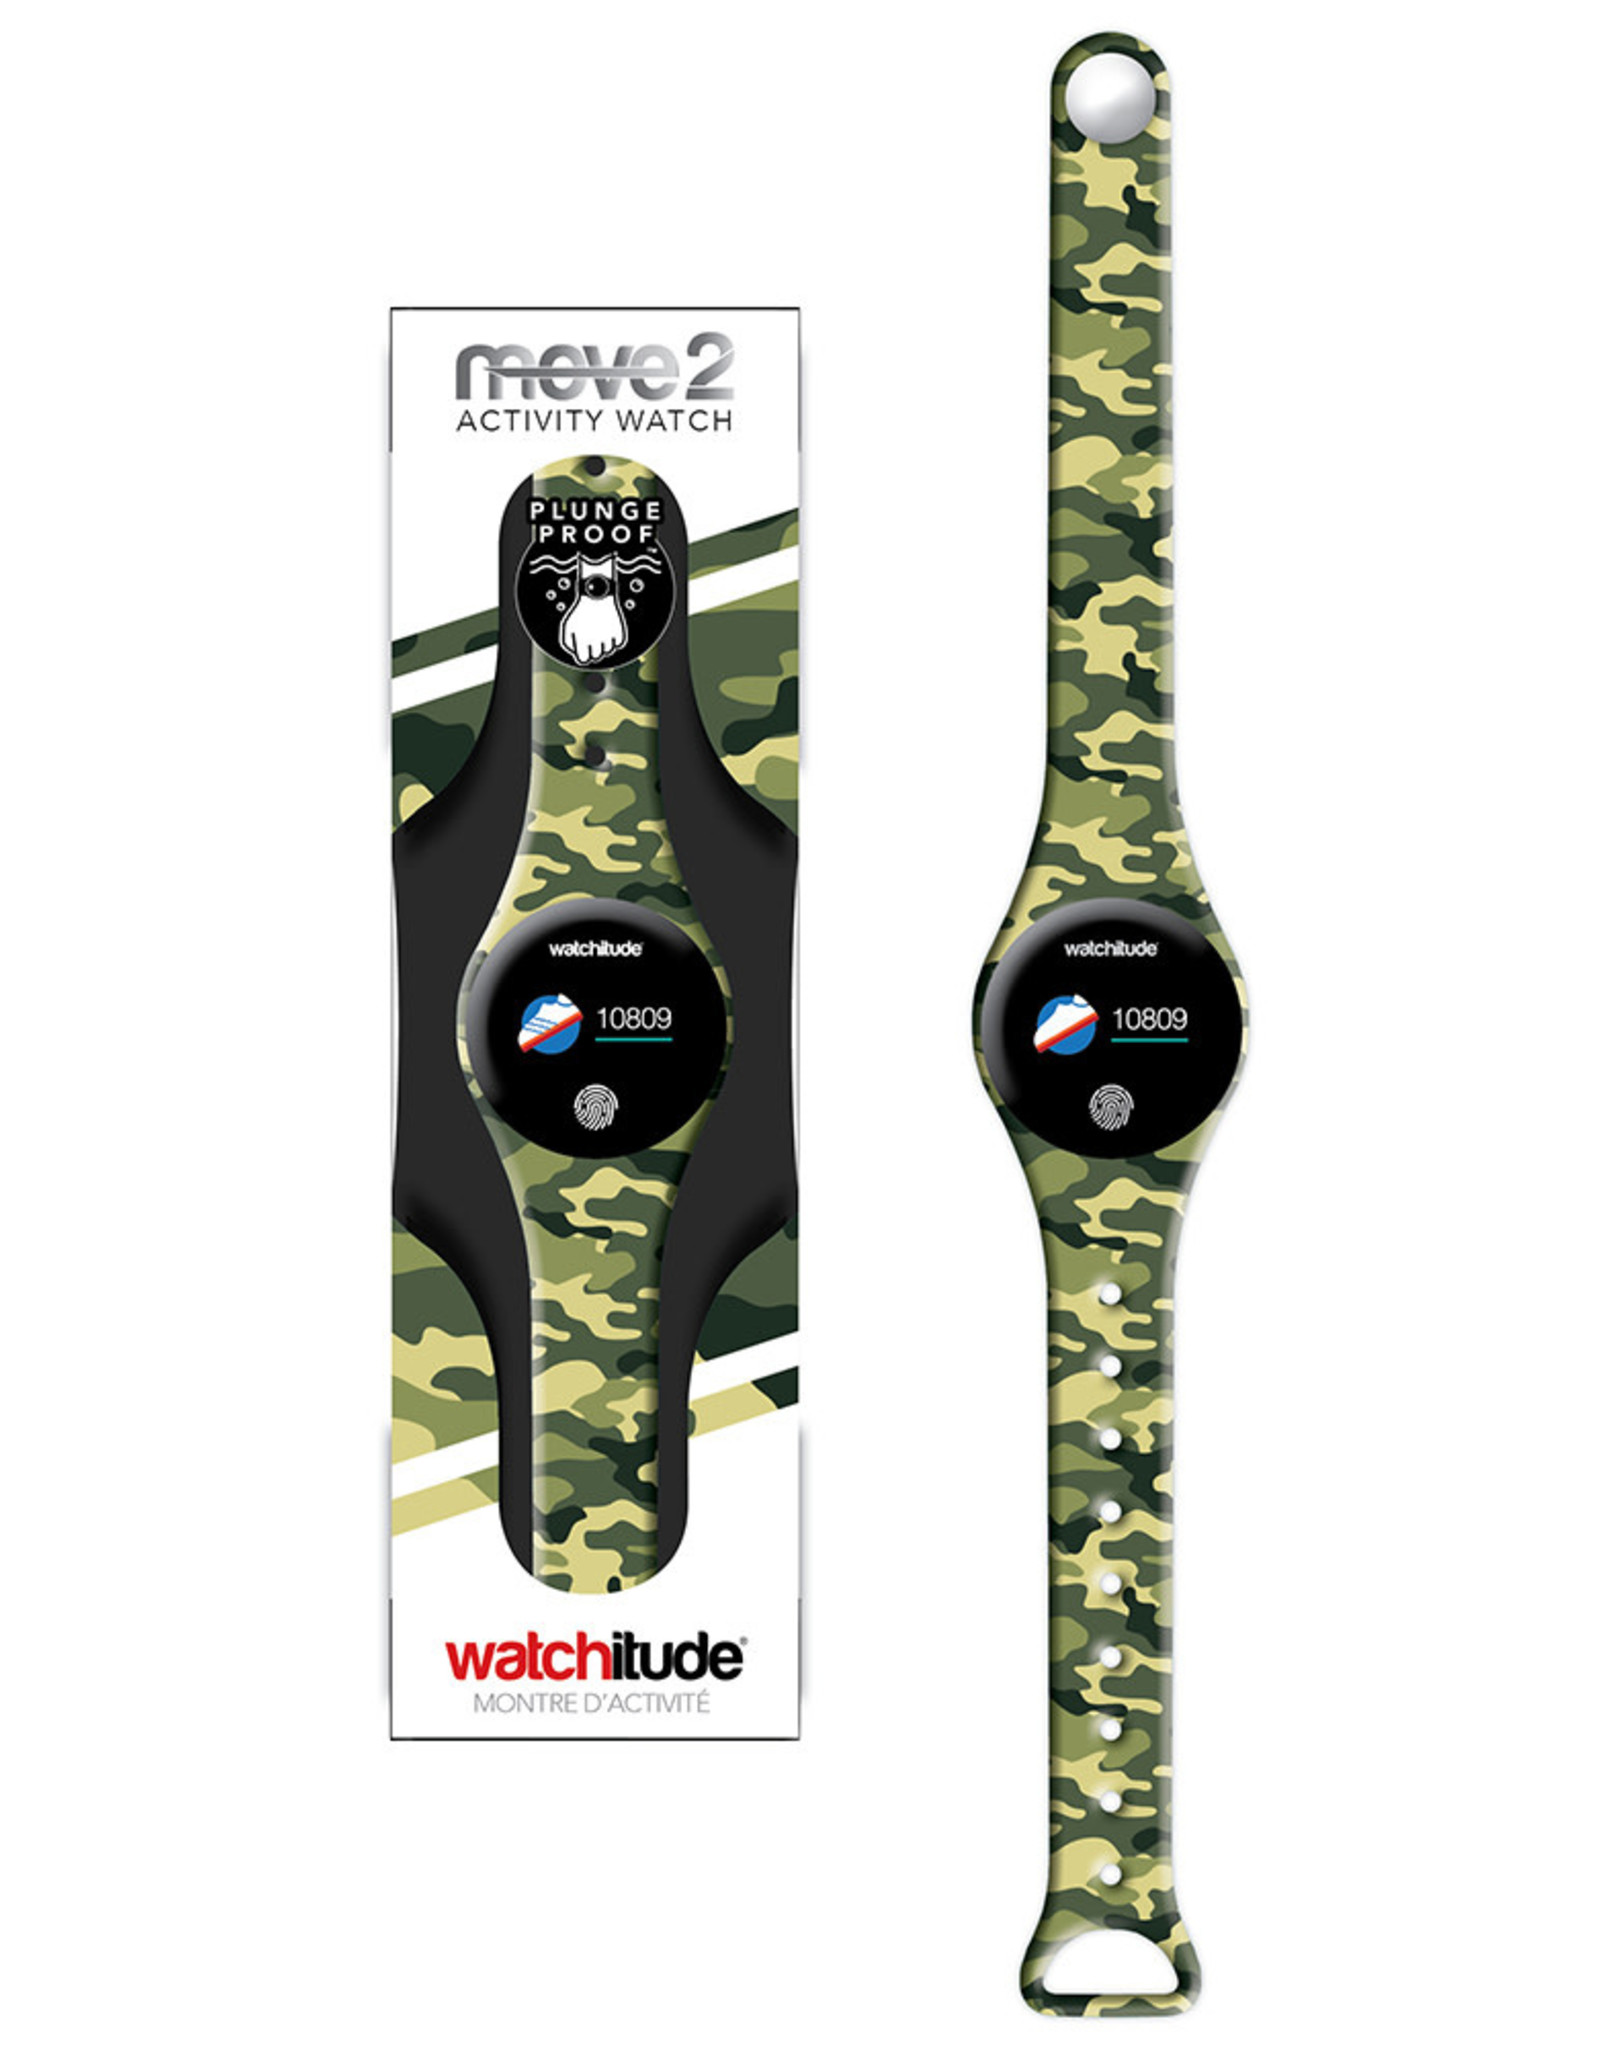 Watchitude Army Camo -  Move2 - Kids Activity Plunge Proof Watch